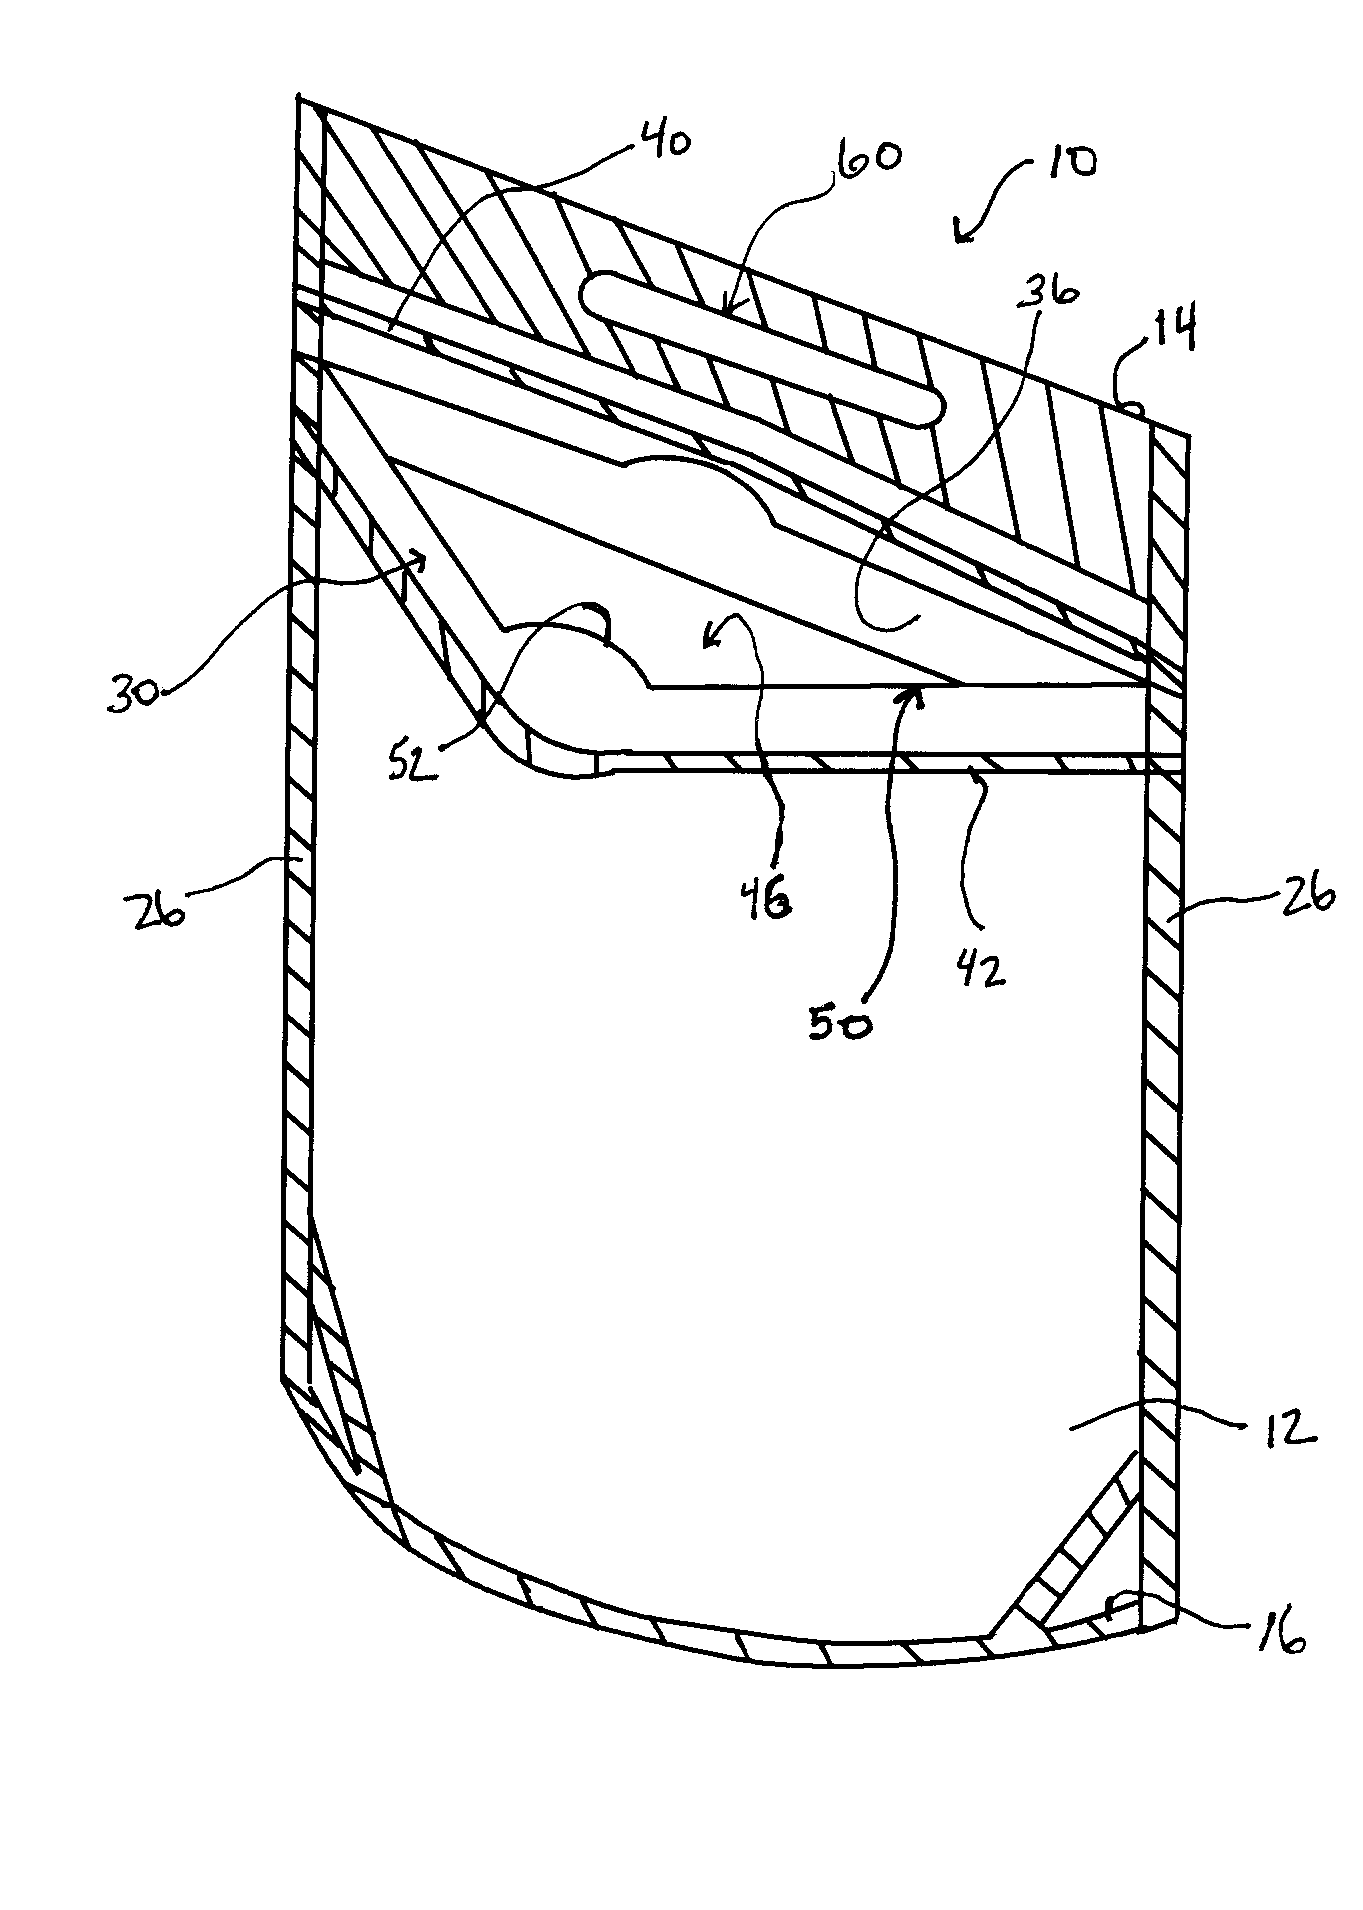 Package with releasable film access opening